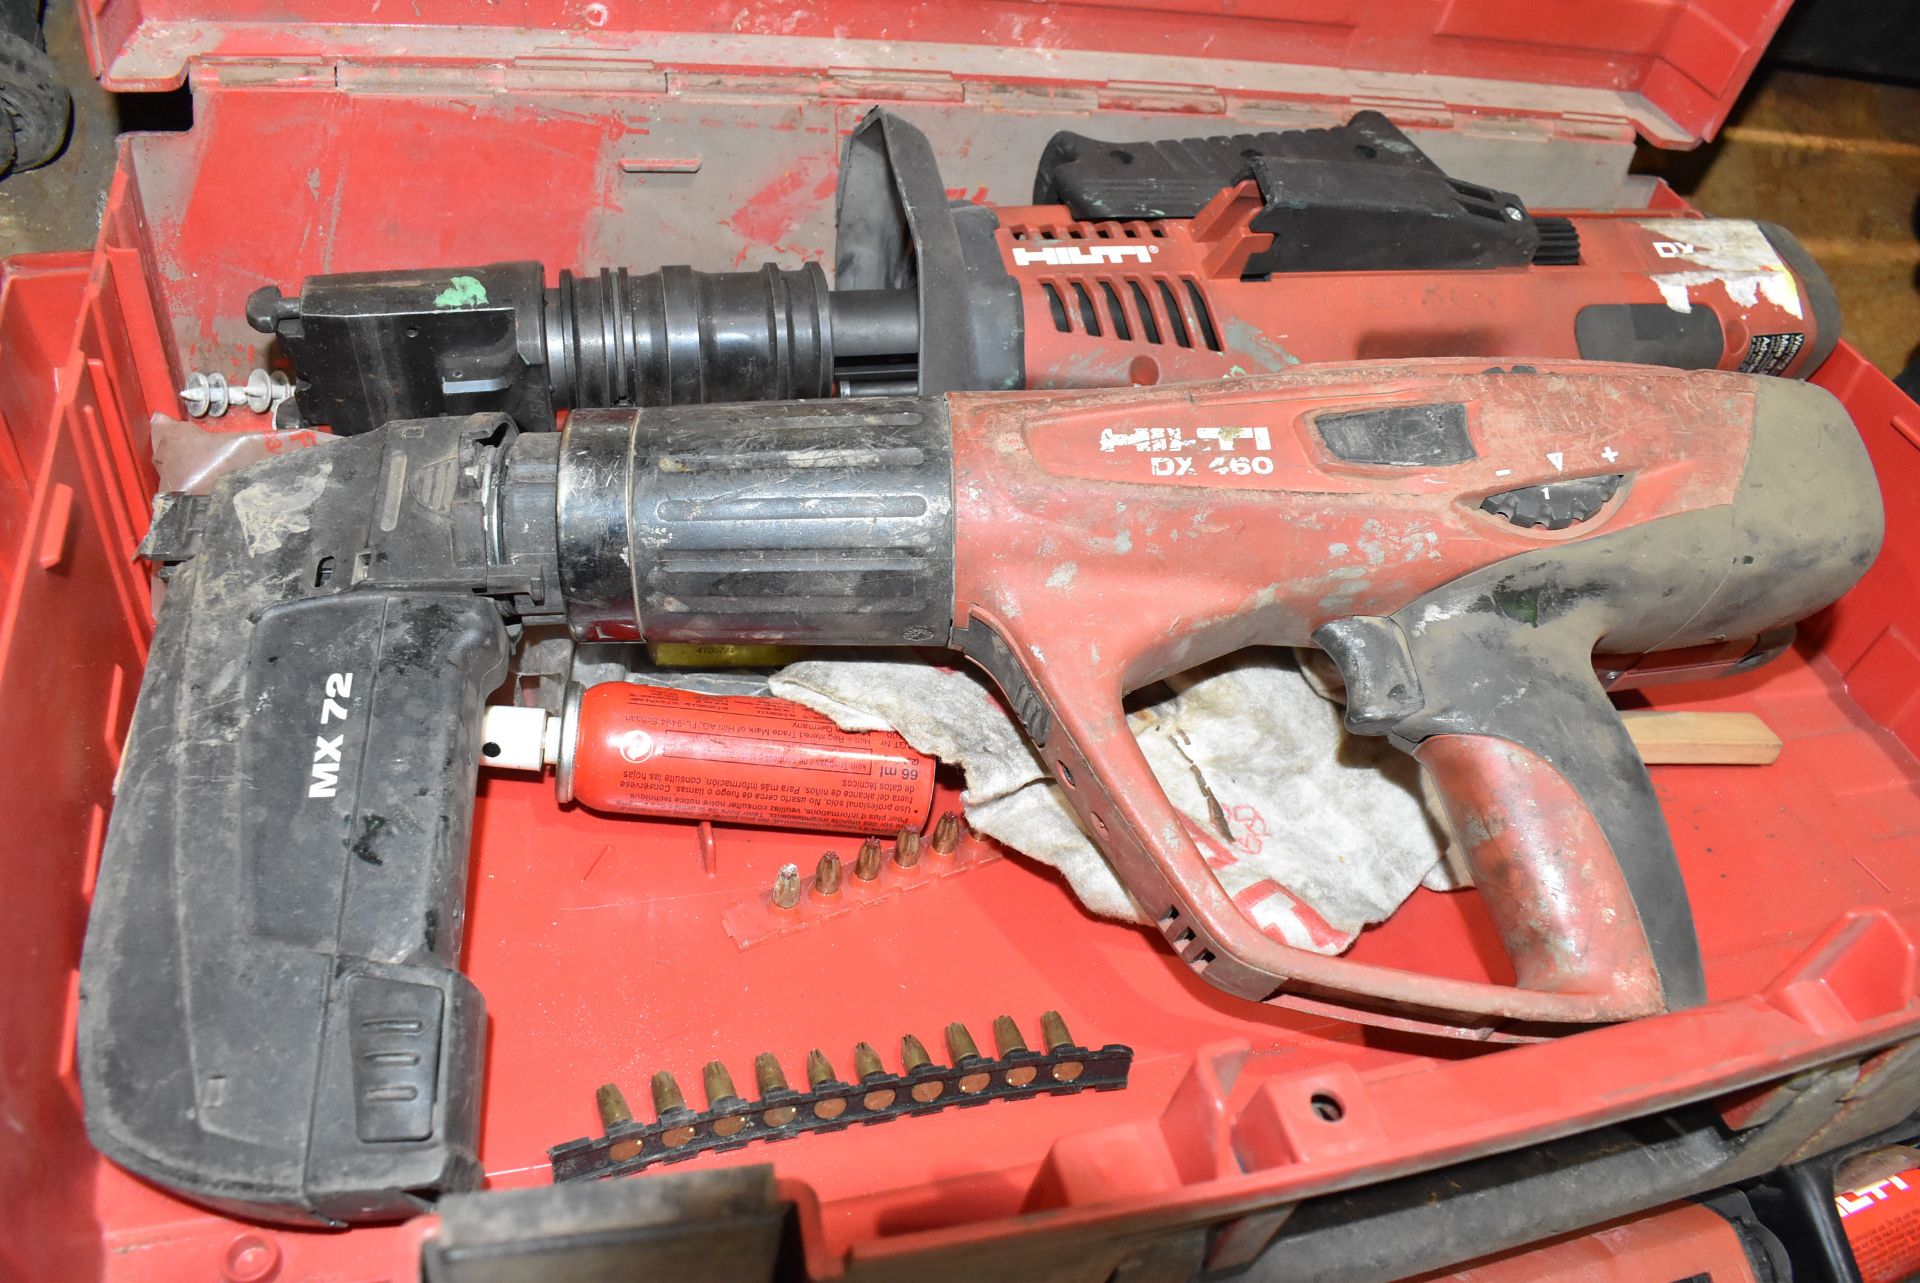 LOT/ HILTI DX460 FULLY AUTOMATIC POWER-ACTUATED FASTENING TOOL WITH HILTI MX72 NAIL MAGAZINE & HILTI - Image 2 of 6